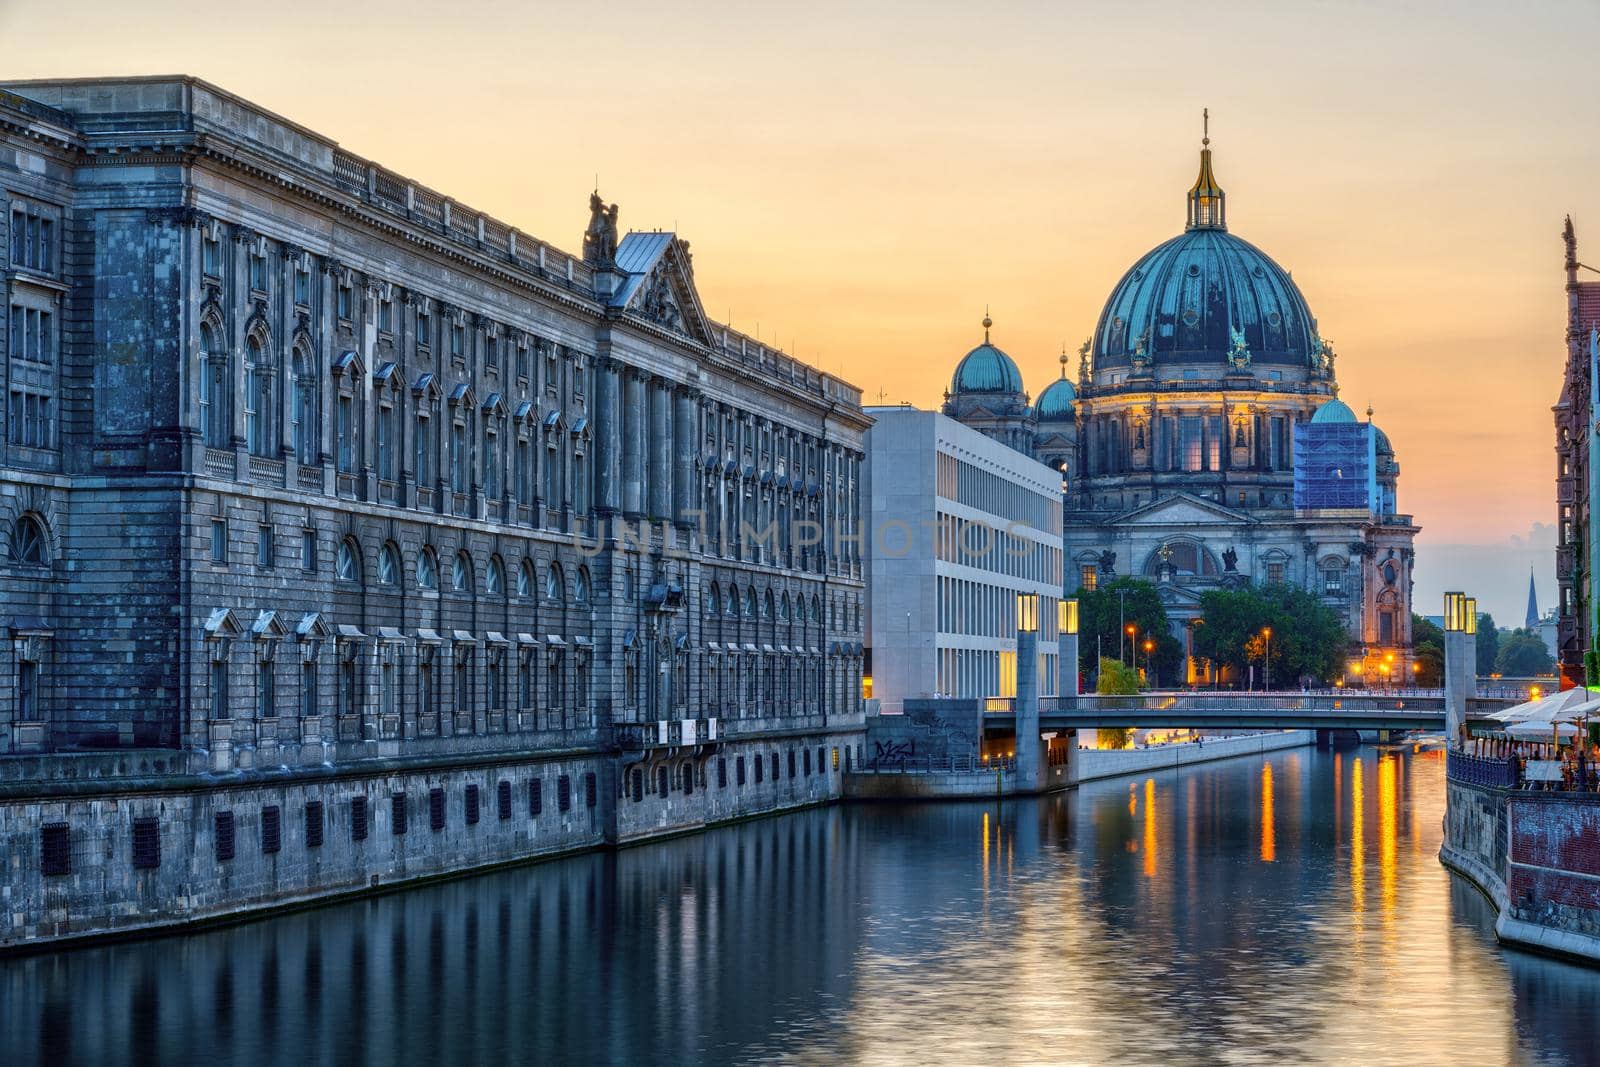 The river Spree in Berlin after sunset with the cathedral in the back